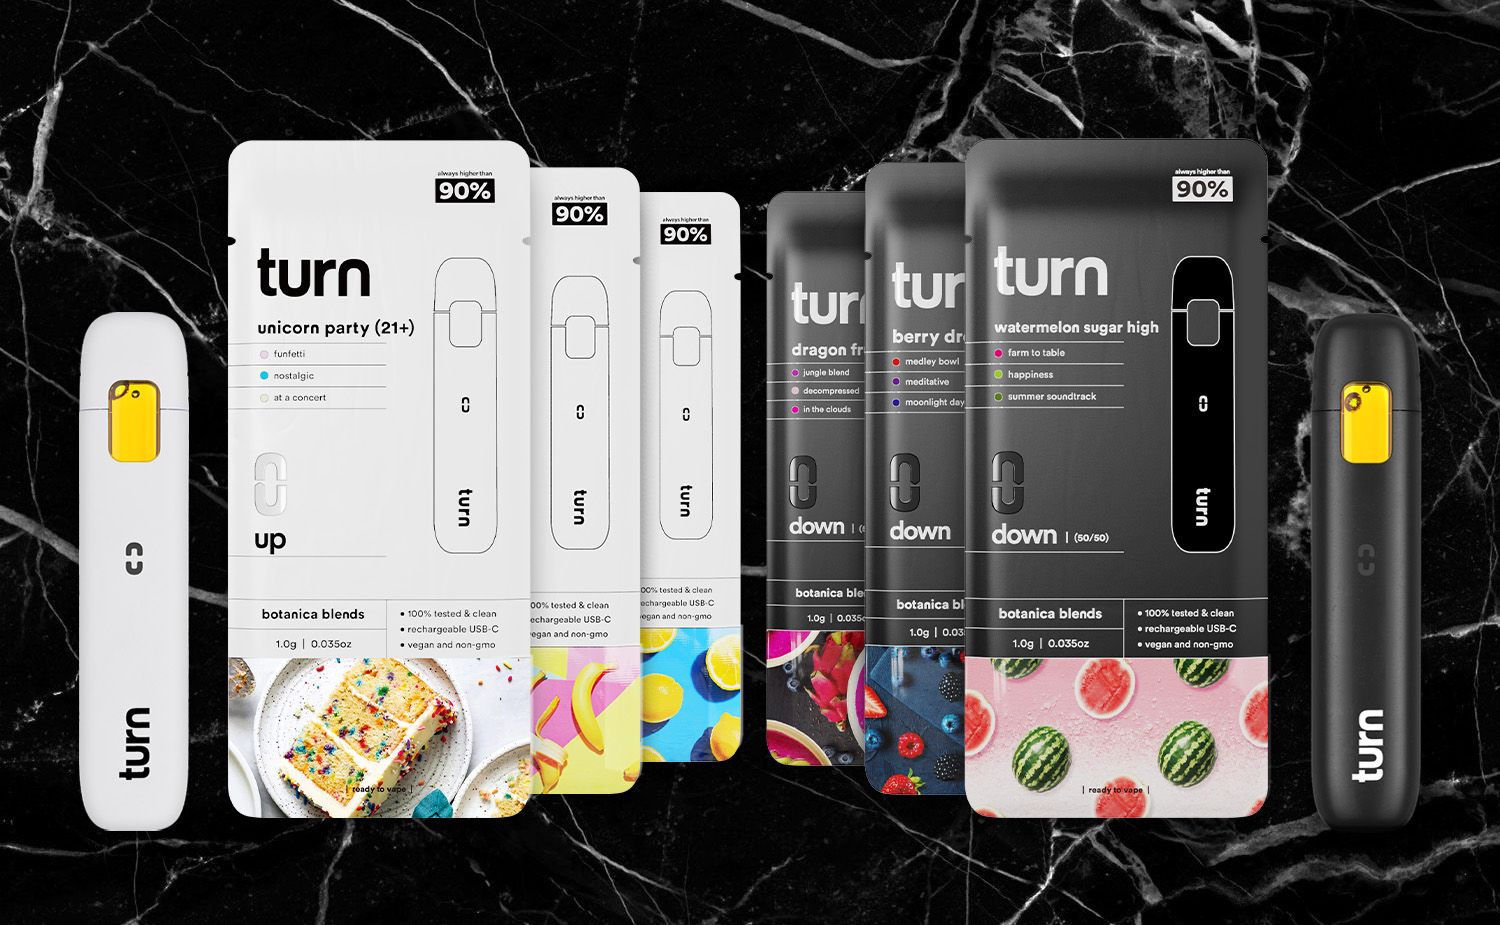 Turn Disposable Vape Pens are available filled with a variety of THC oils, providing a range of terpene profiles and effects states. The white "UP" packaging and black "DOWN" packaging from Turn THC Vapes allows customers to quickly understand the types of effects they can expect to experience.